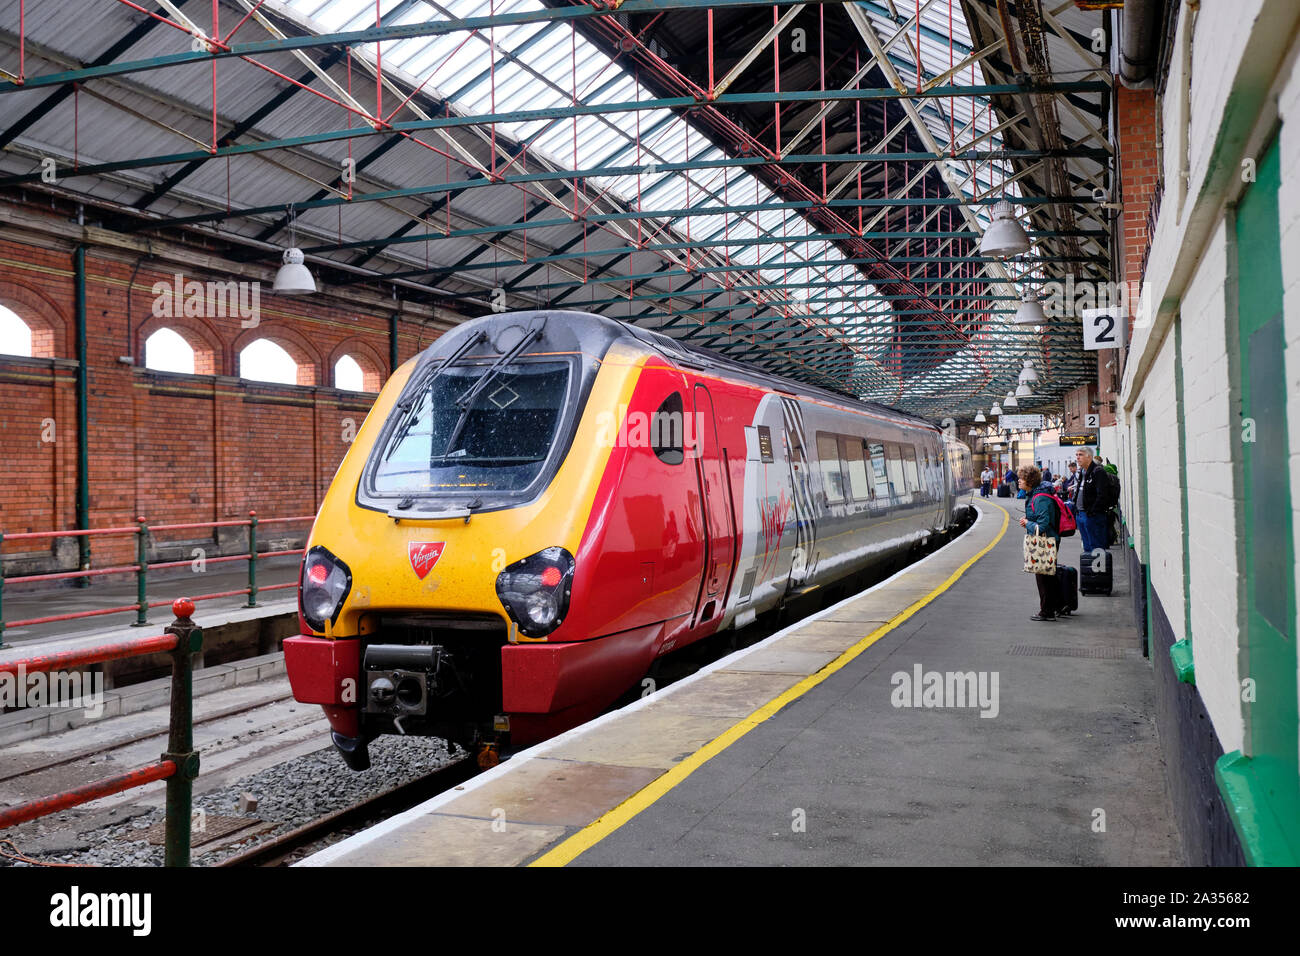 Virgin Class 221 Super Voyager at station about to take on passengers in Holyhead Wales. Stock Photo